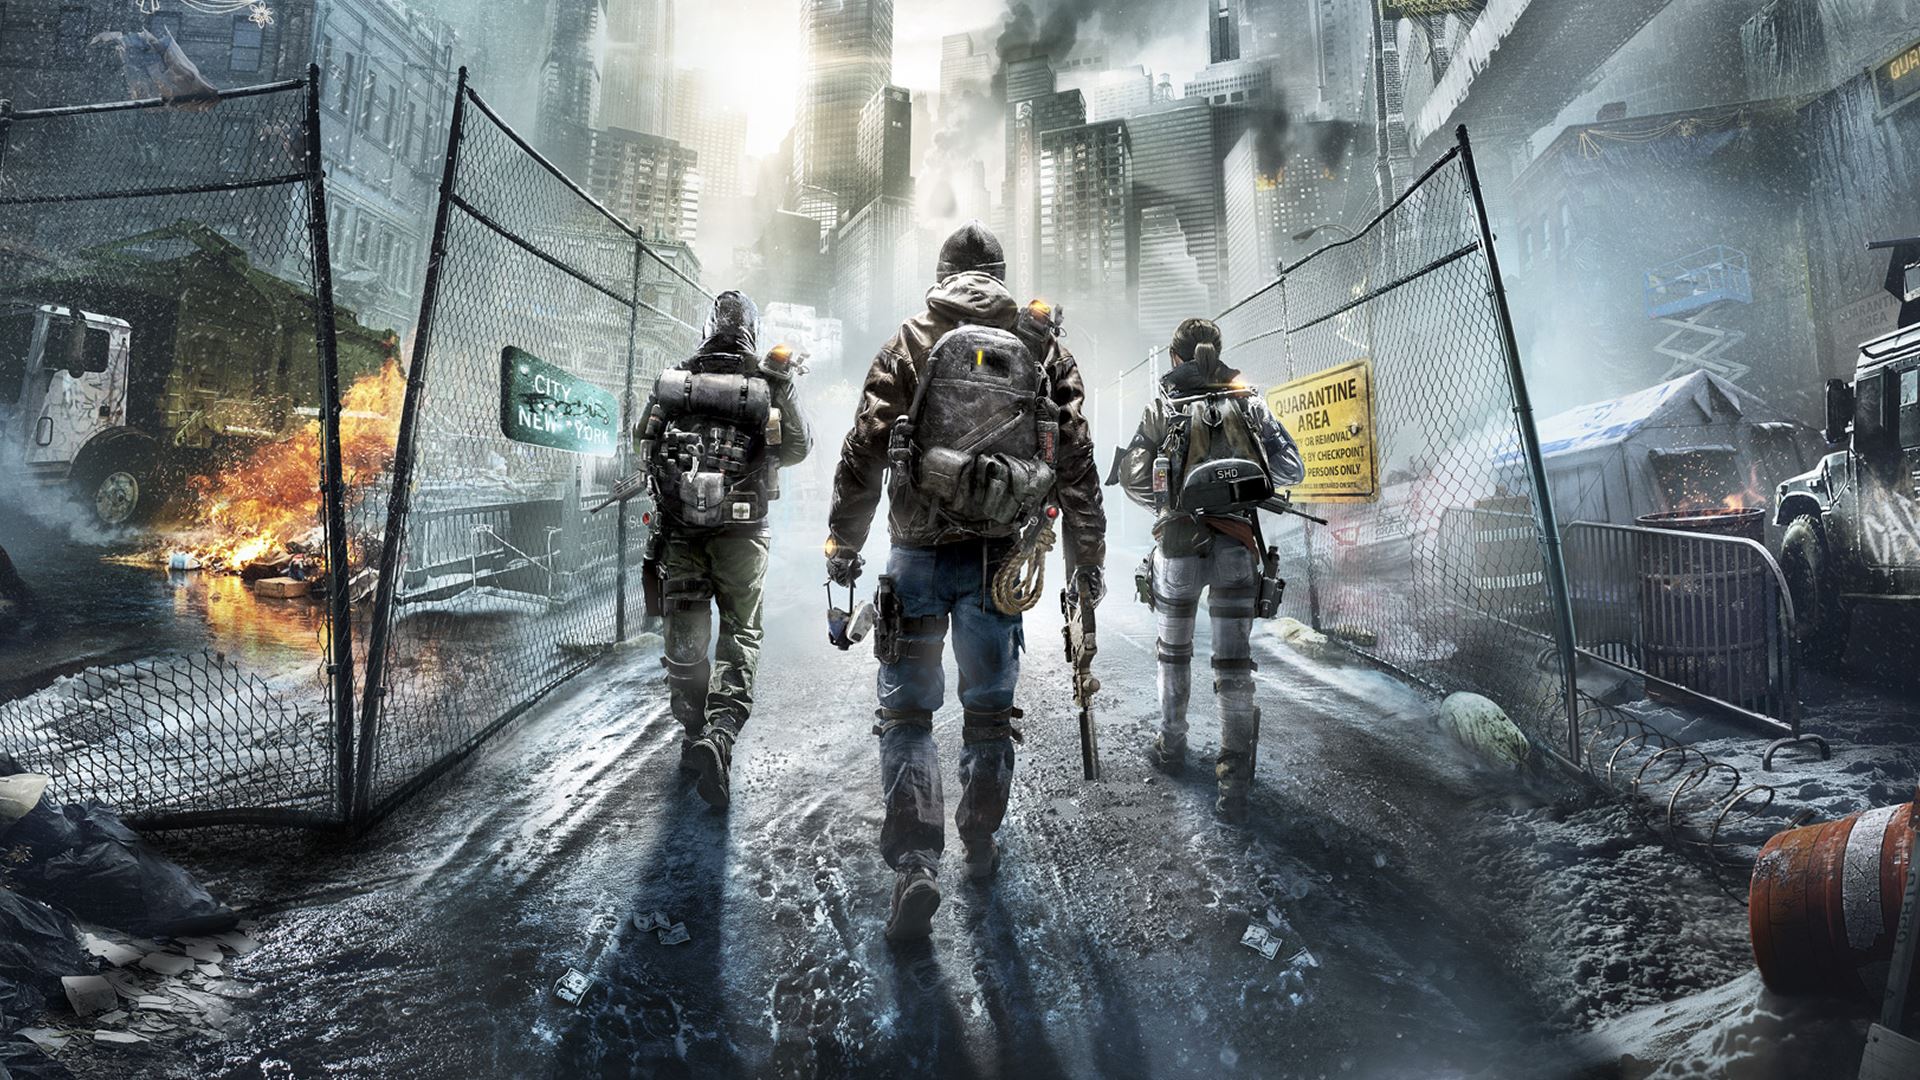 Ubisoft Putting Hold on “The Division” Reviews Until Game Is Released - Now How Will the Launch Play Out?